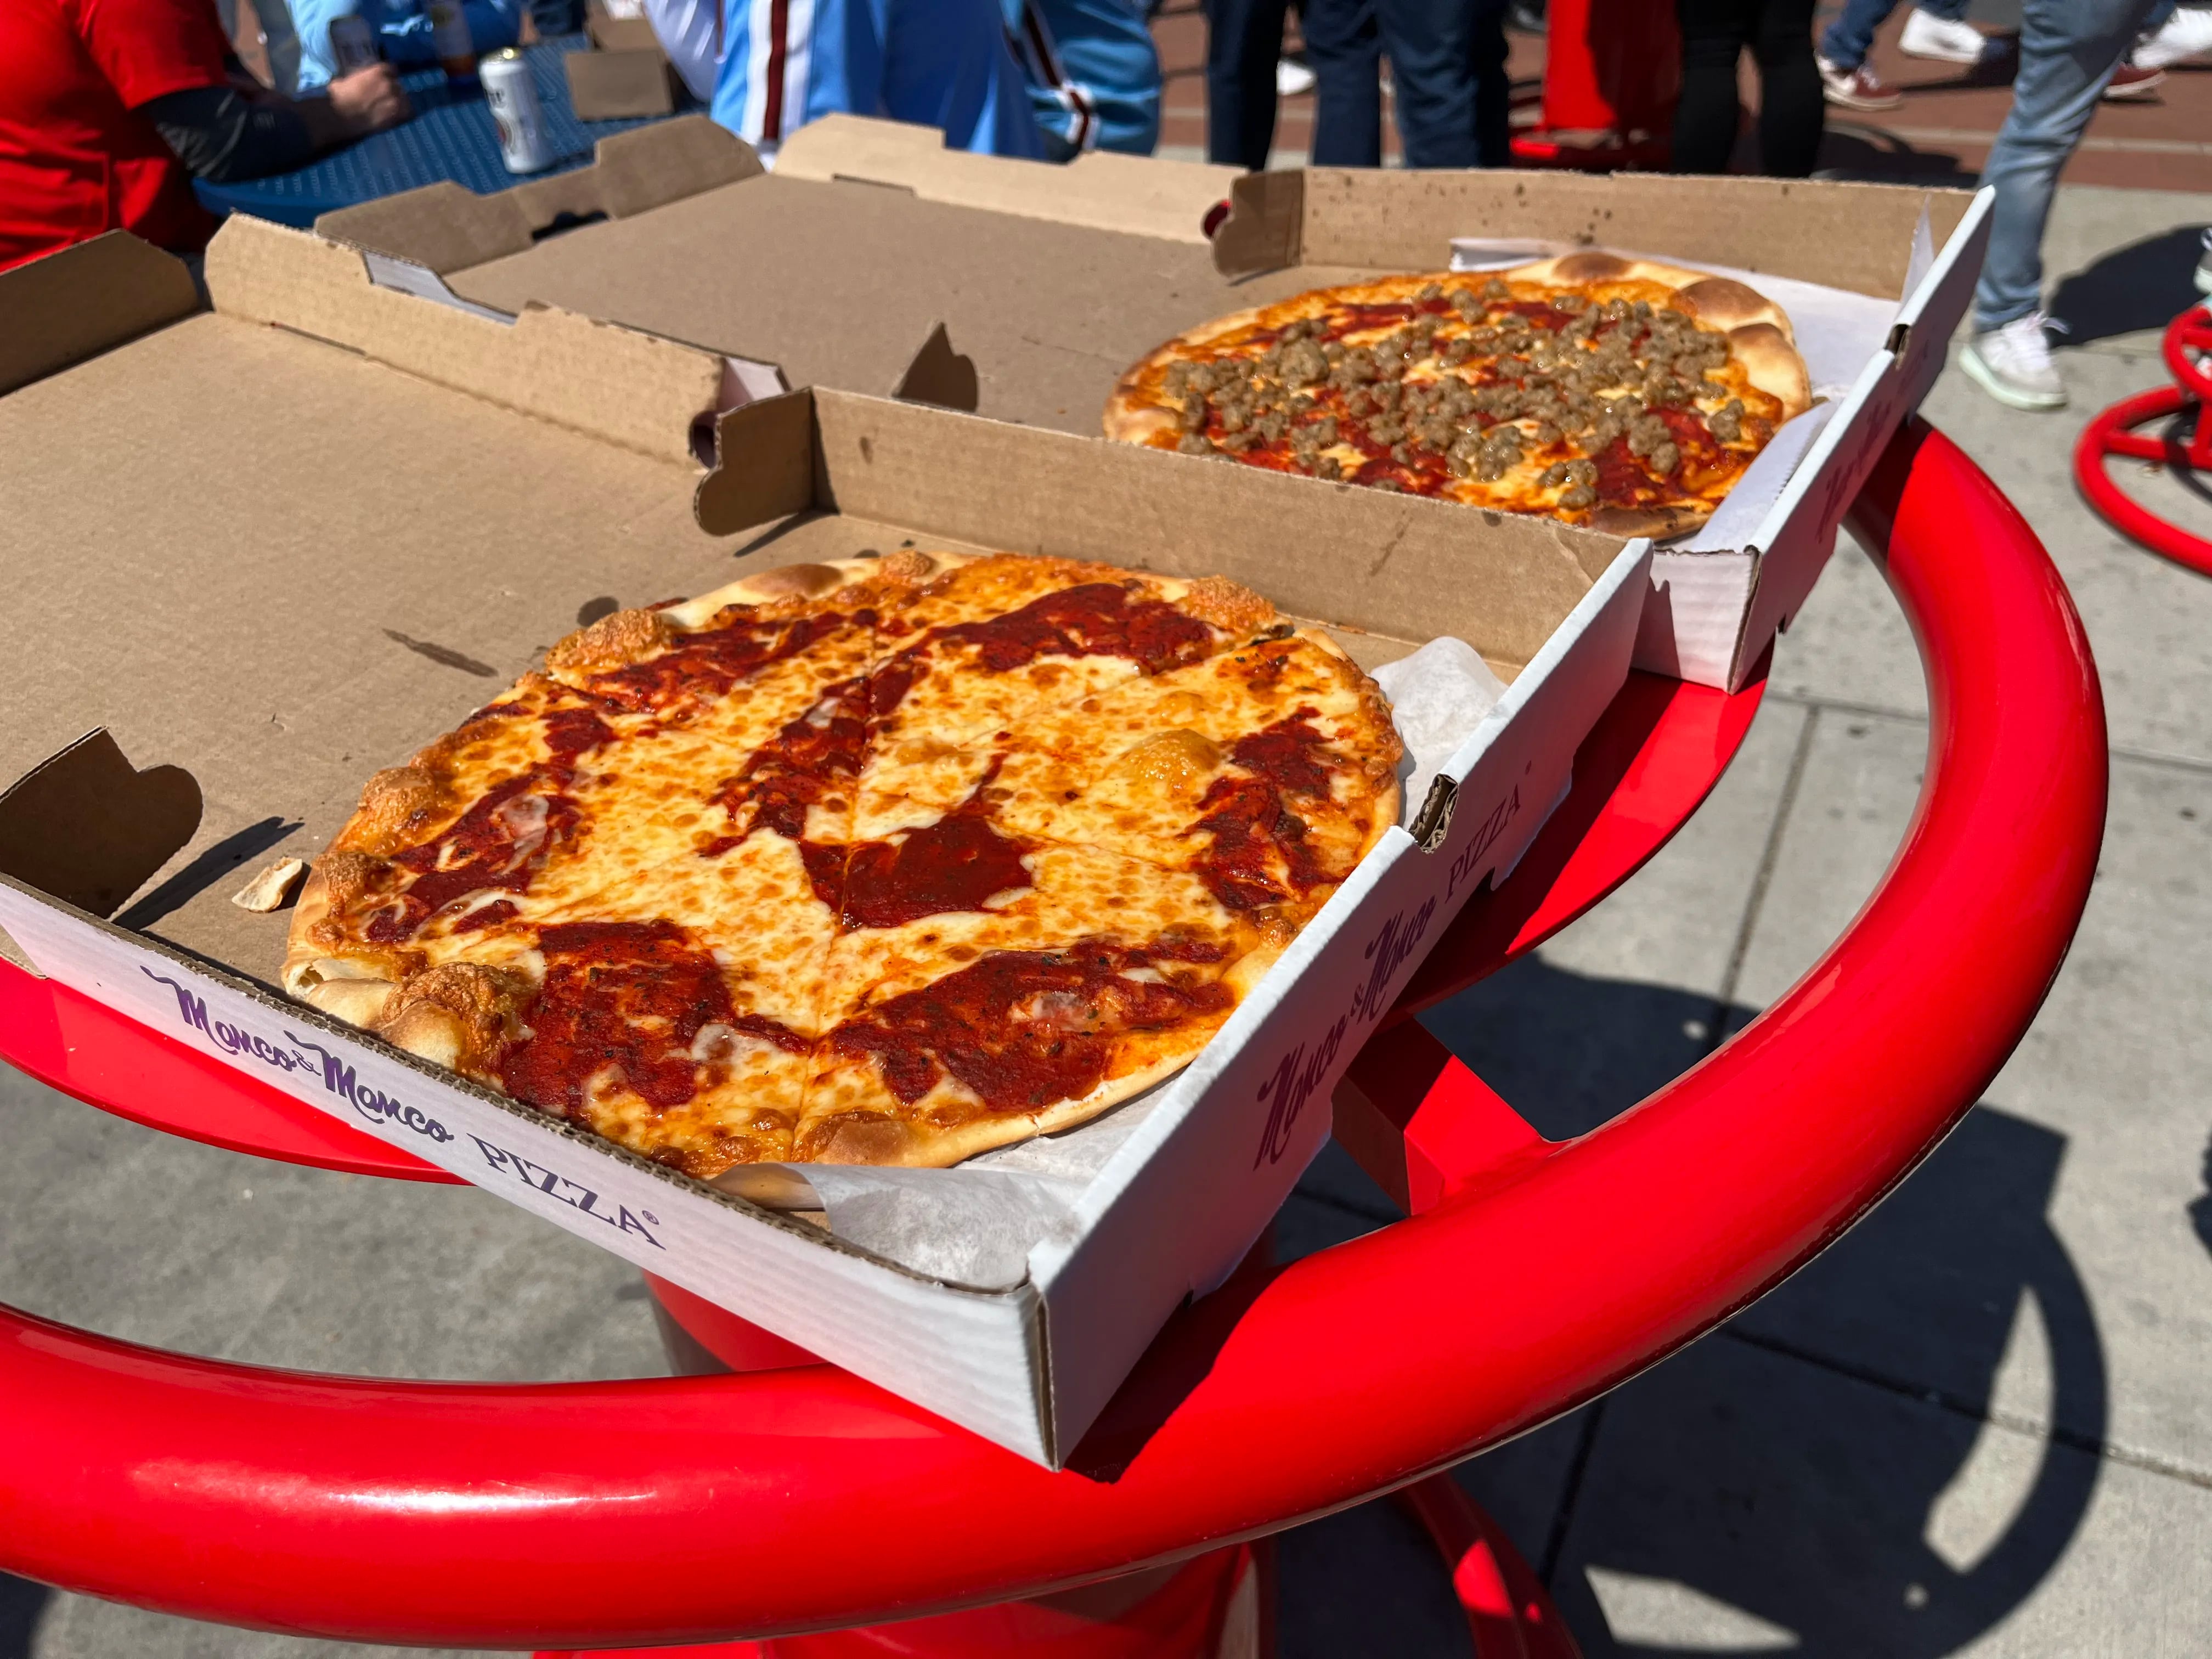 Plain cheese and sausage personal pizzas from Manco & Manco concession stand at Citizens Bank Park.